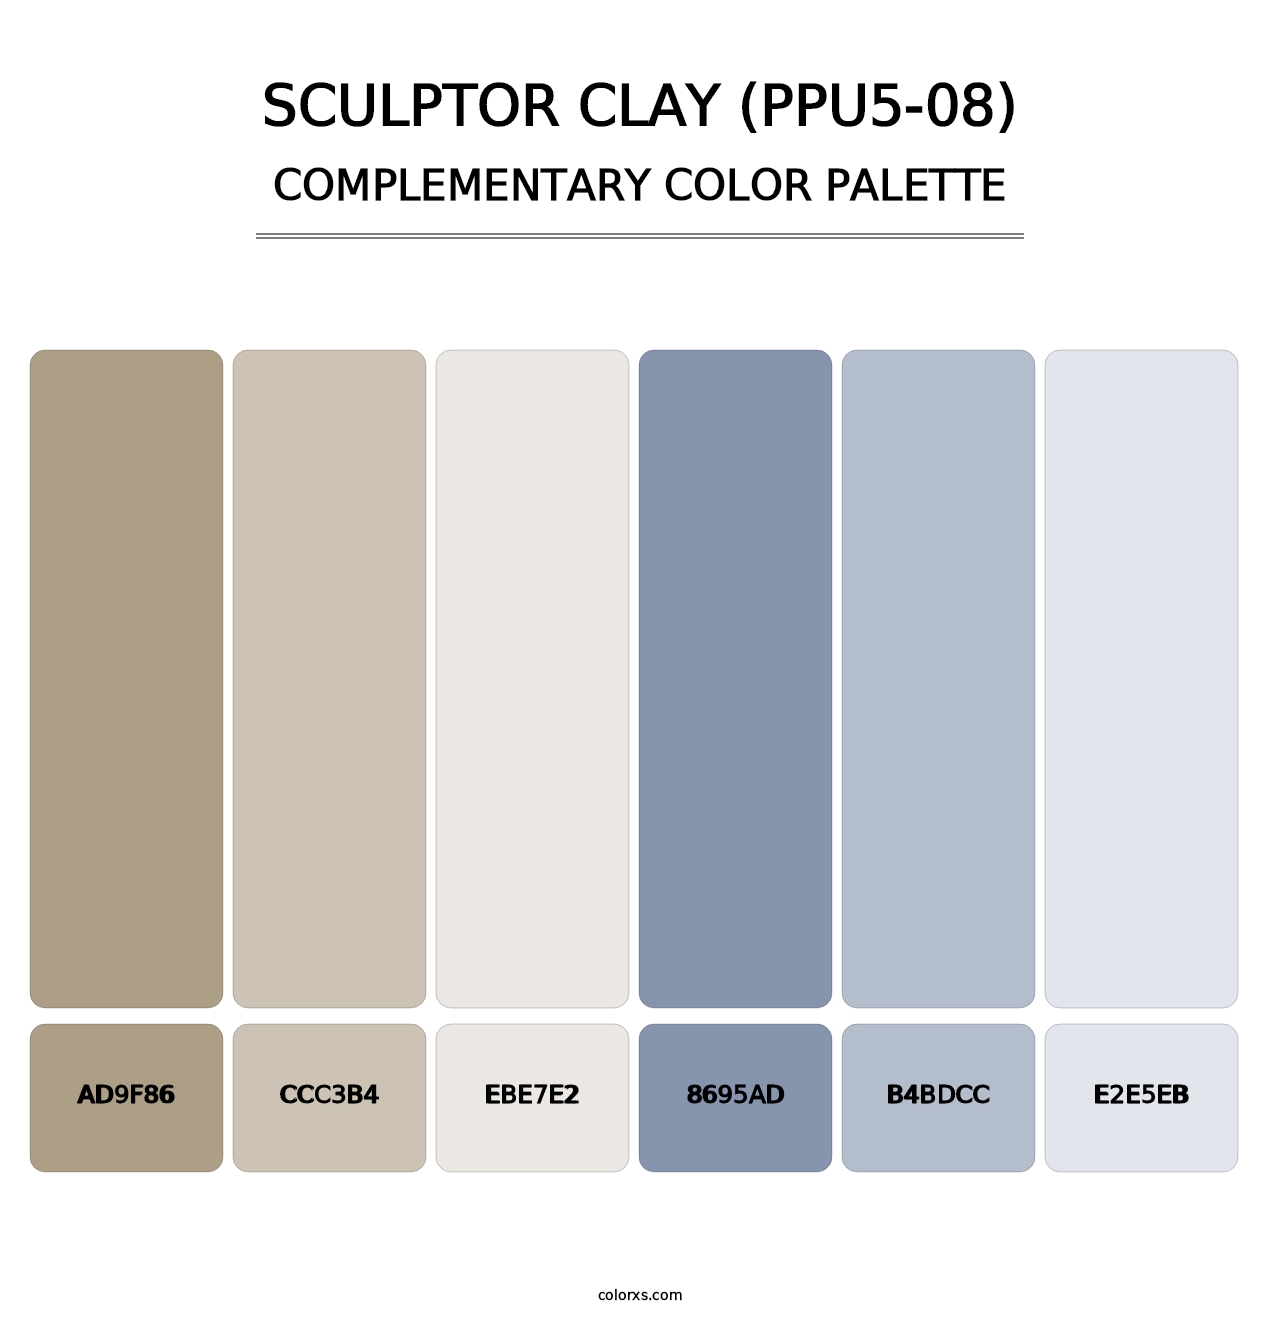 Sculptor Clay (PPU5-08) - Complementary Color Palette